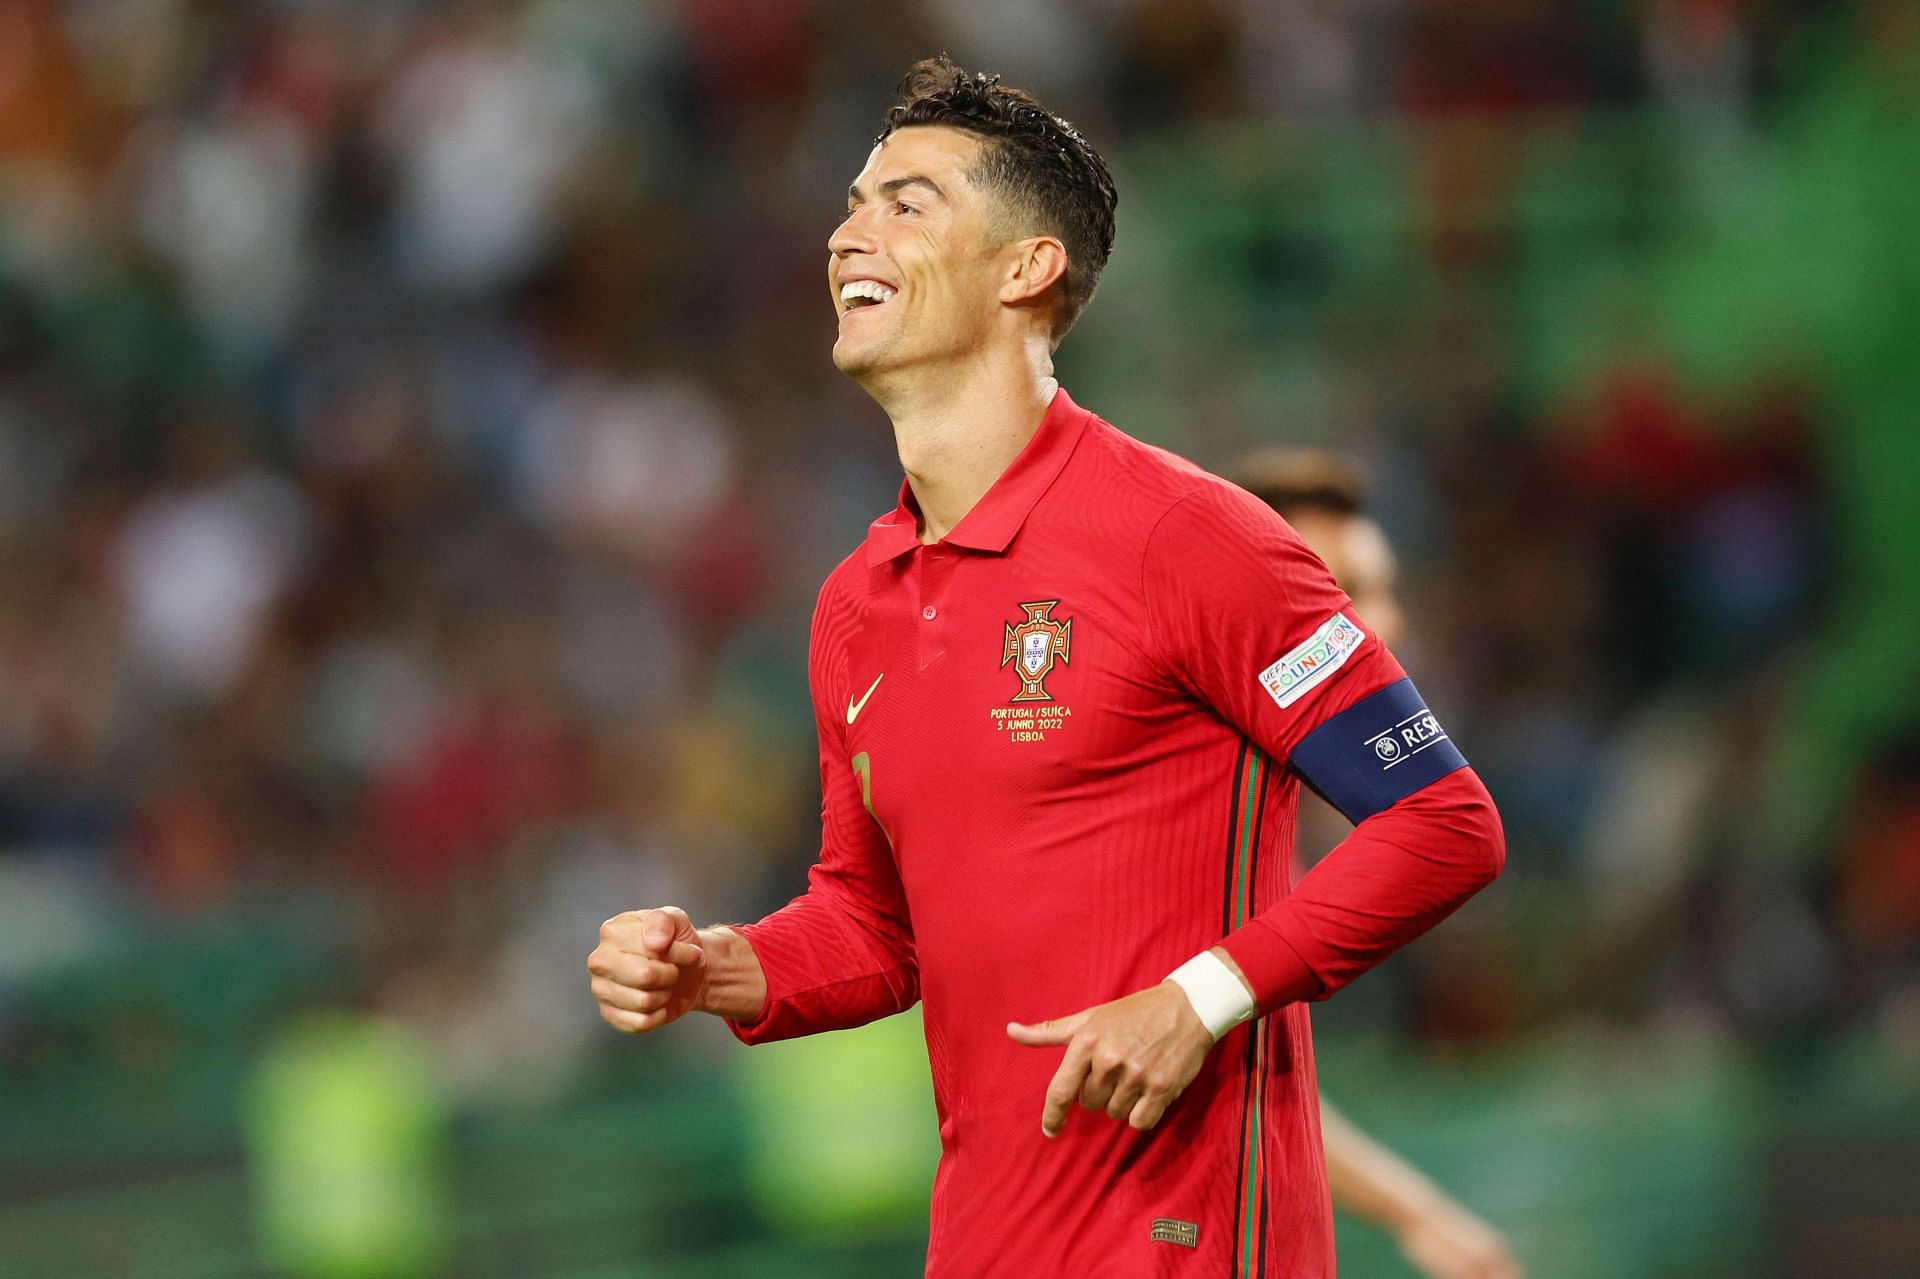 Cristiano Ronaldo in action for Portugal against Switzerland: UEFA Nations League - League Path Group 2